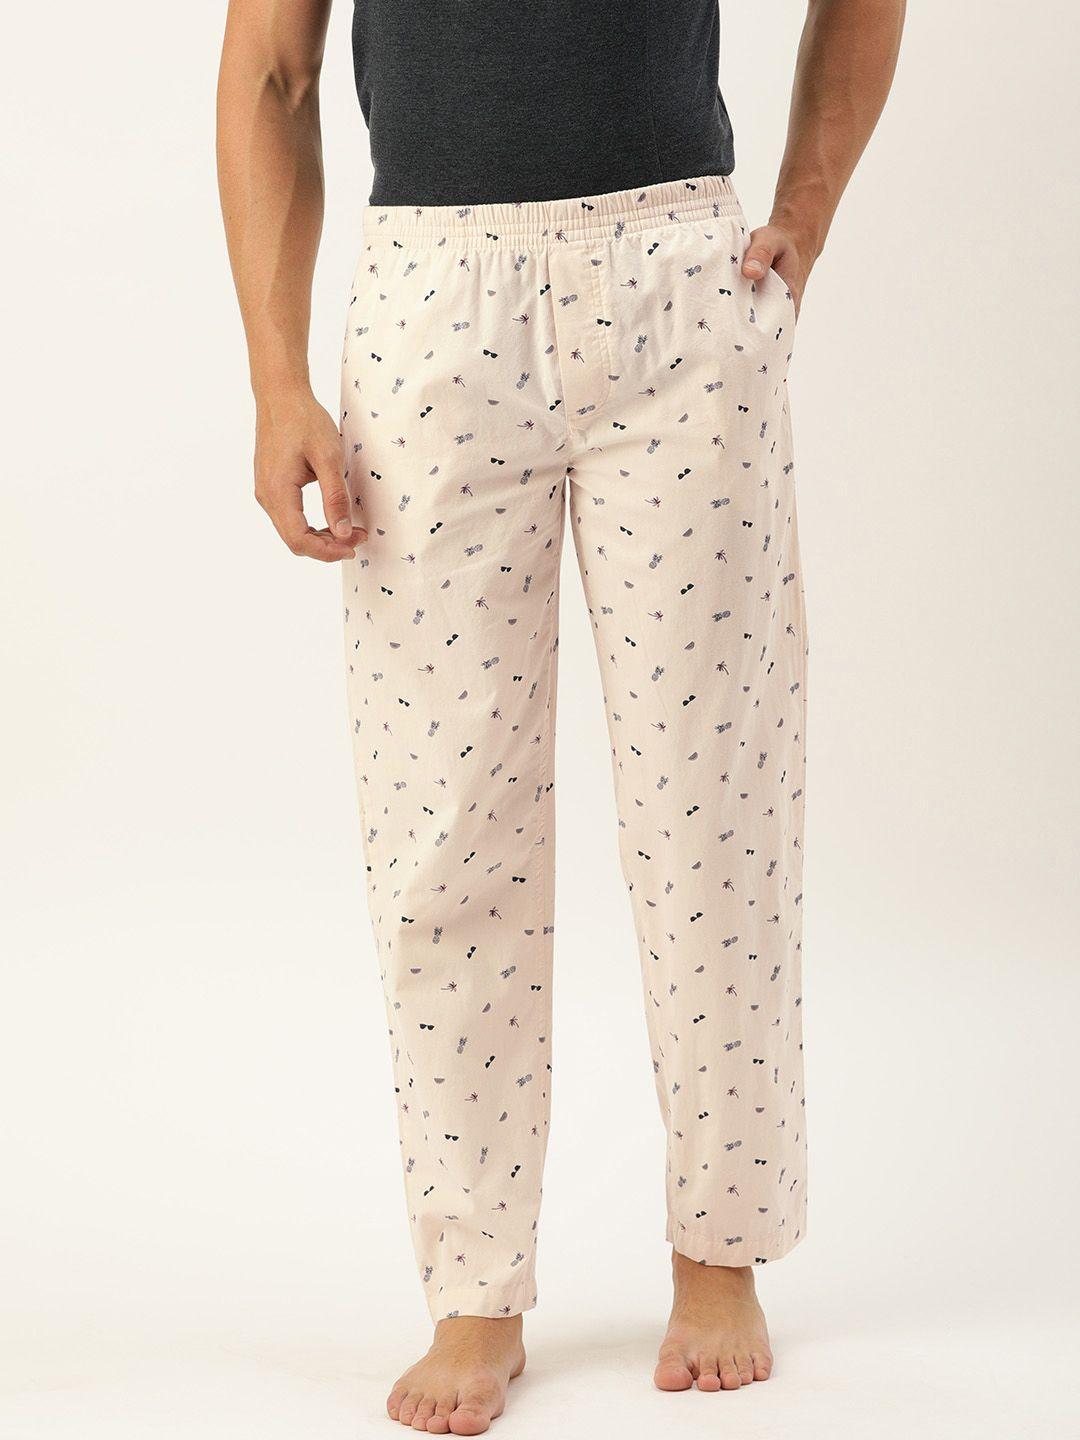 the indian garage co men's off-white and navy blue printed lounge pants